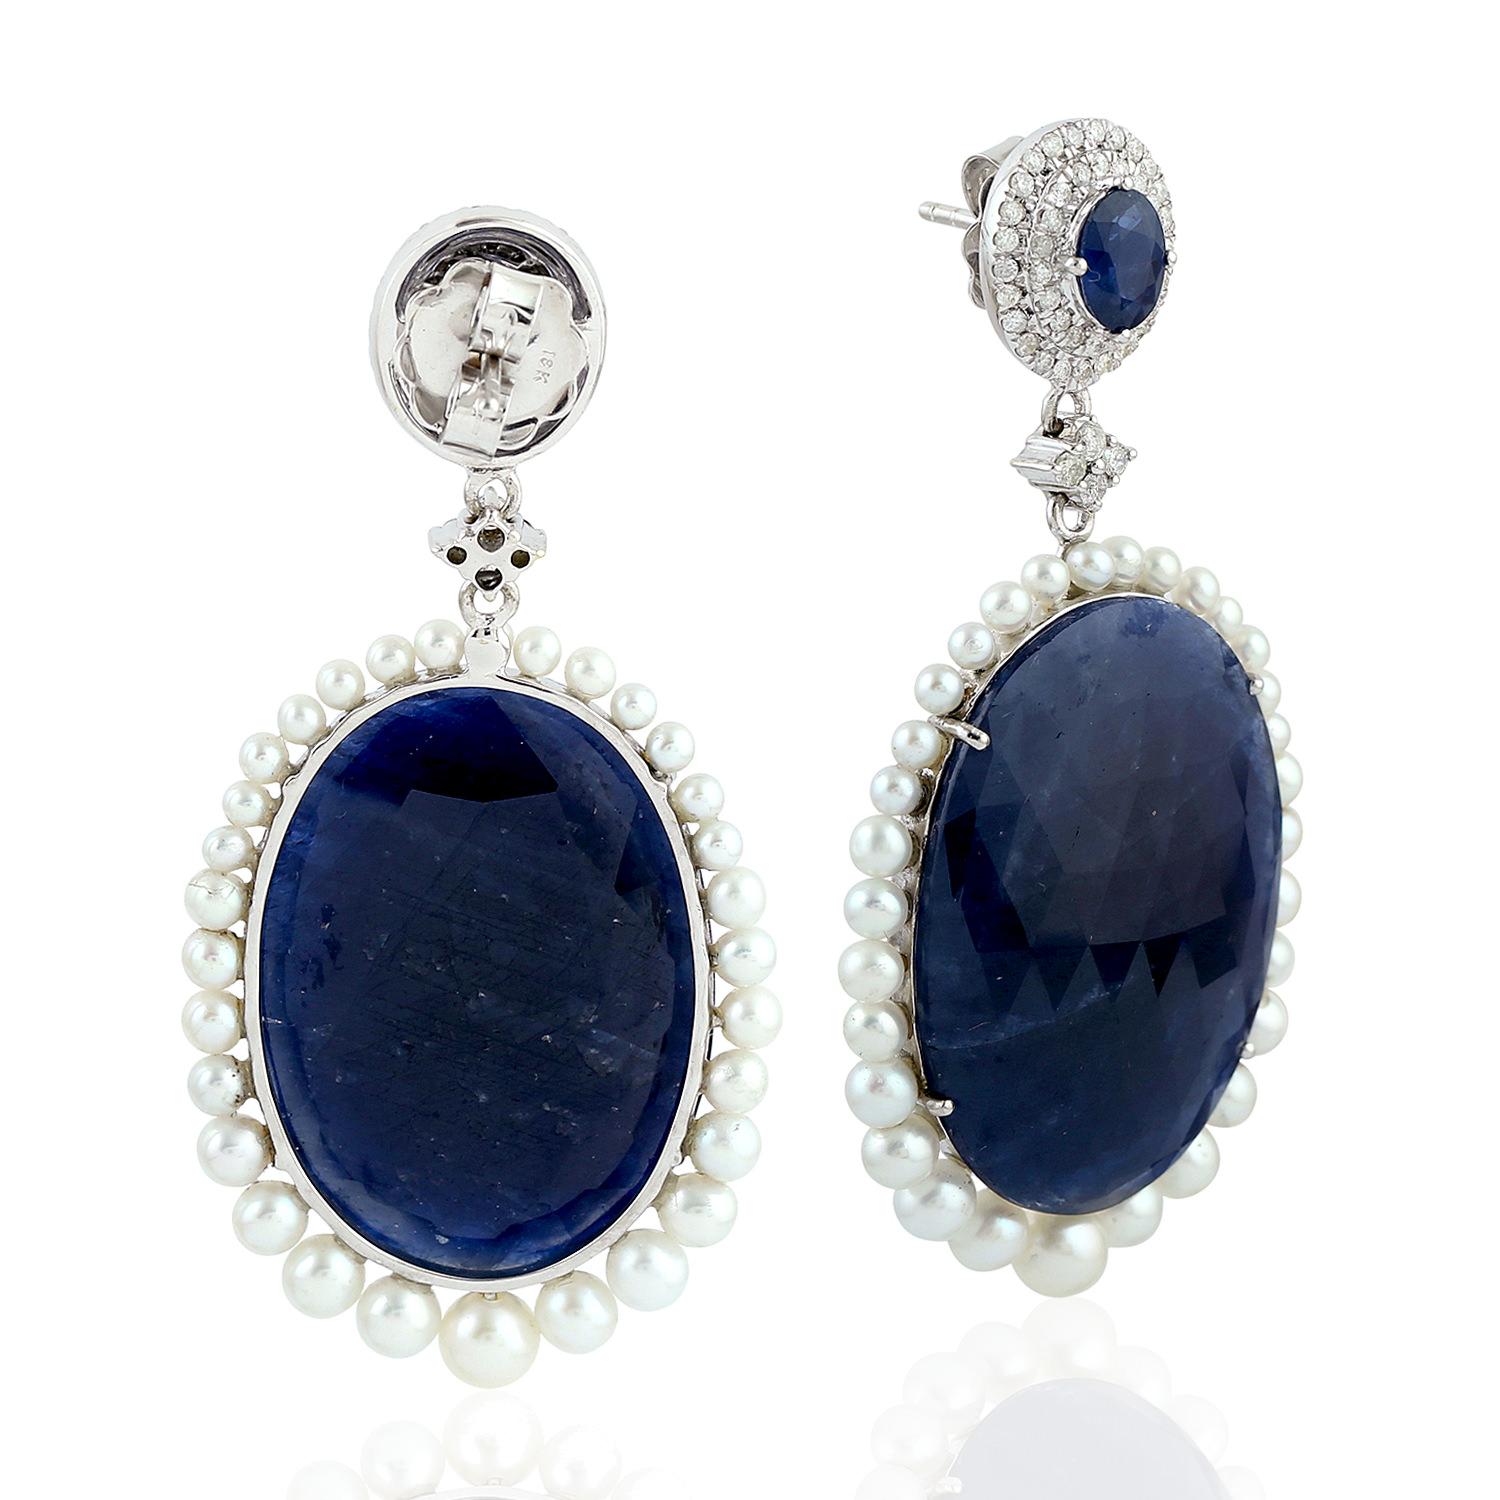 Handcrafted from 18-karat white gold. These stunning earrings are set with 68.6 carats blue sapphire, 11.64 carats pearl and .75 carats diamonds. Instock

FOLLOW  MEGHNA JEWELS storefront to view the latest collection & exclusive pieces.  Meghna